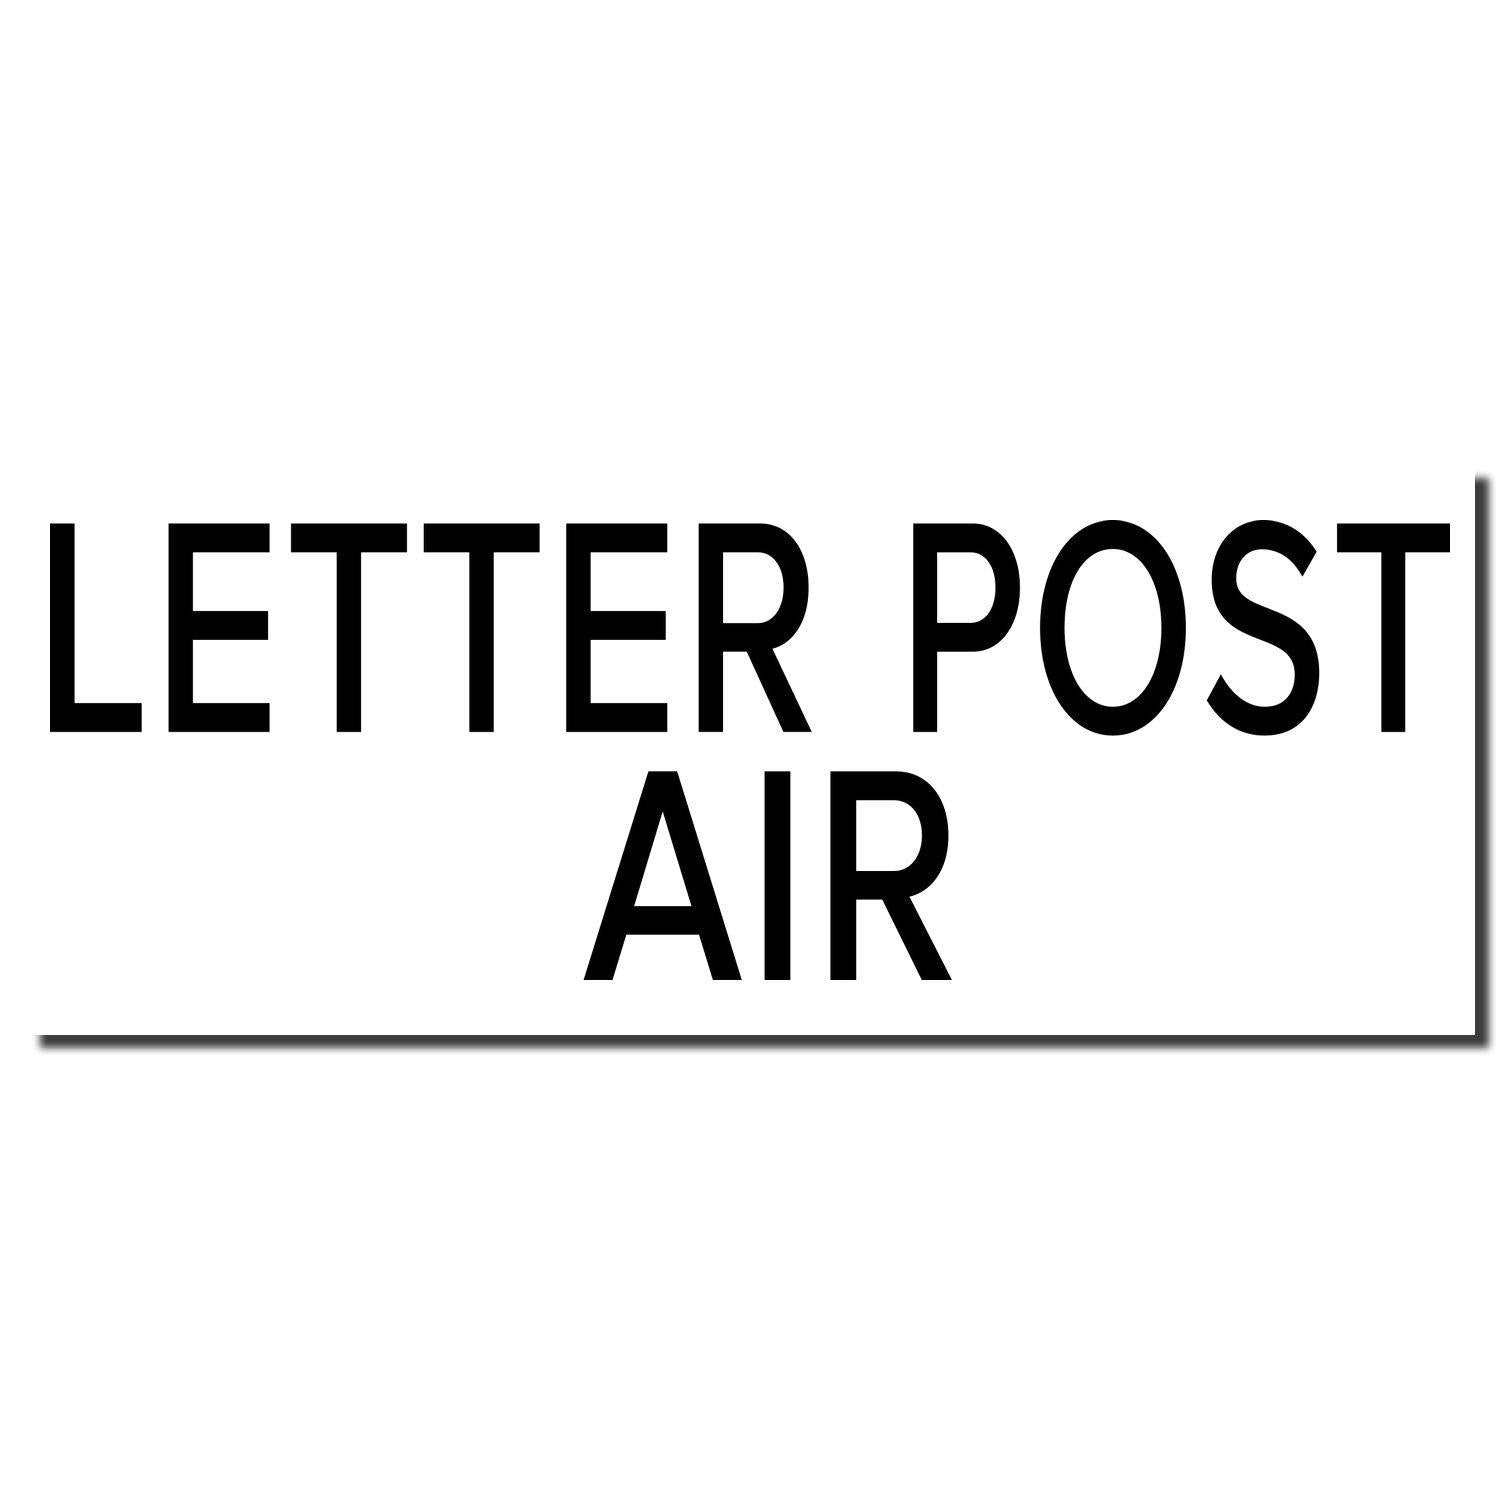 Letter Post Air Rubber Stamp - Engineer Seal Stamps - Brand_Acorn, Impression Size_Small, Stamp Type_Regular Stamp, Type of Use_General, Type of Use_Postal & Mailing